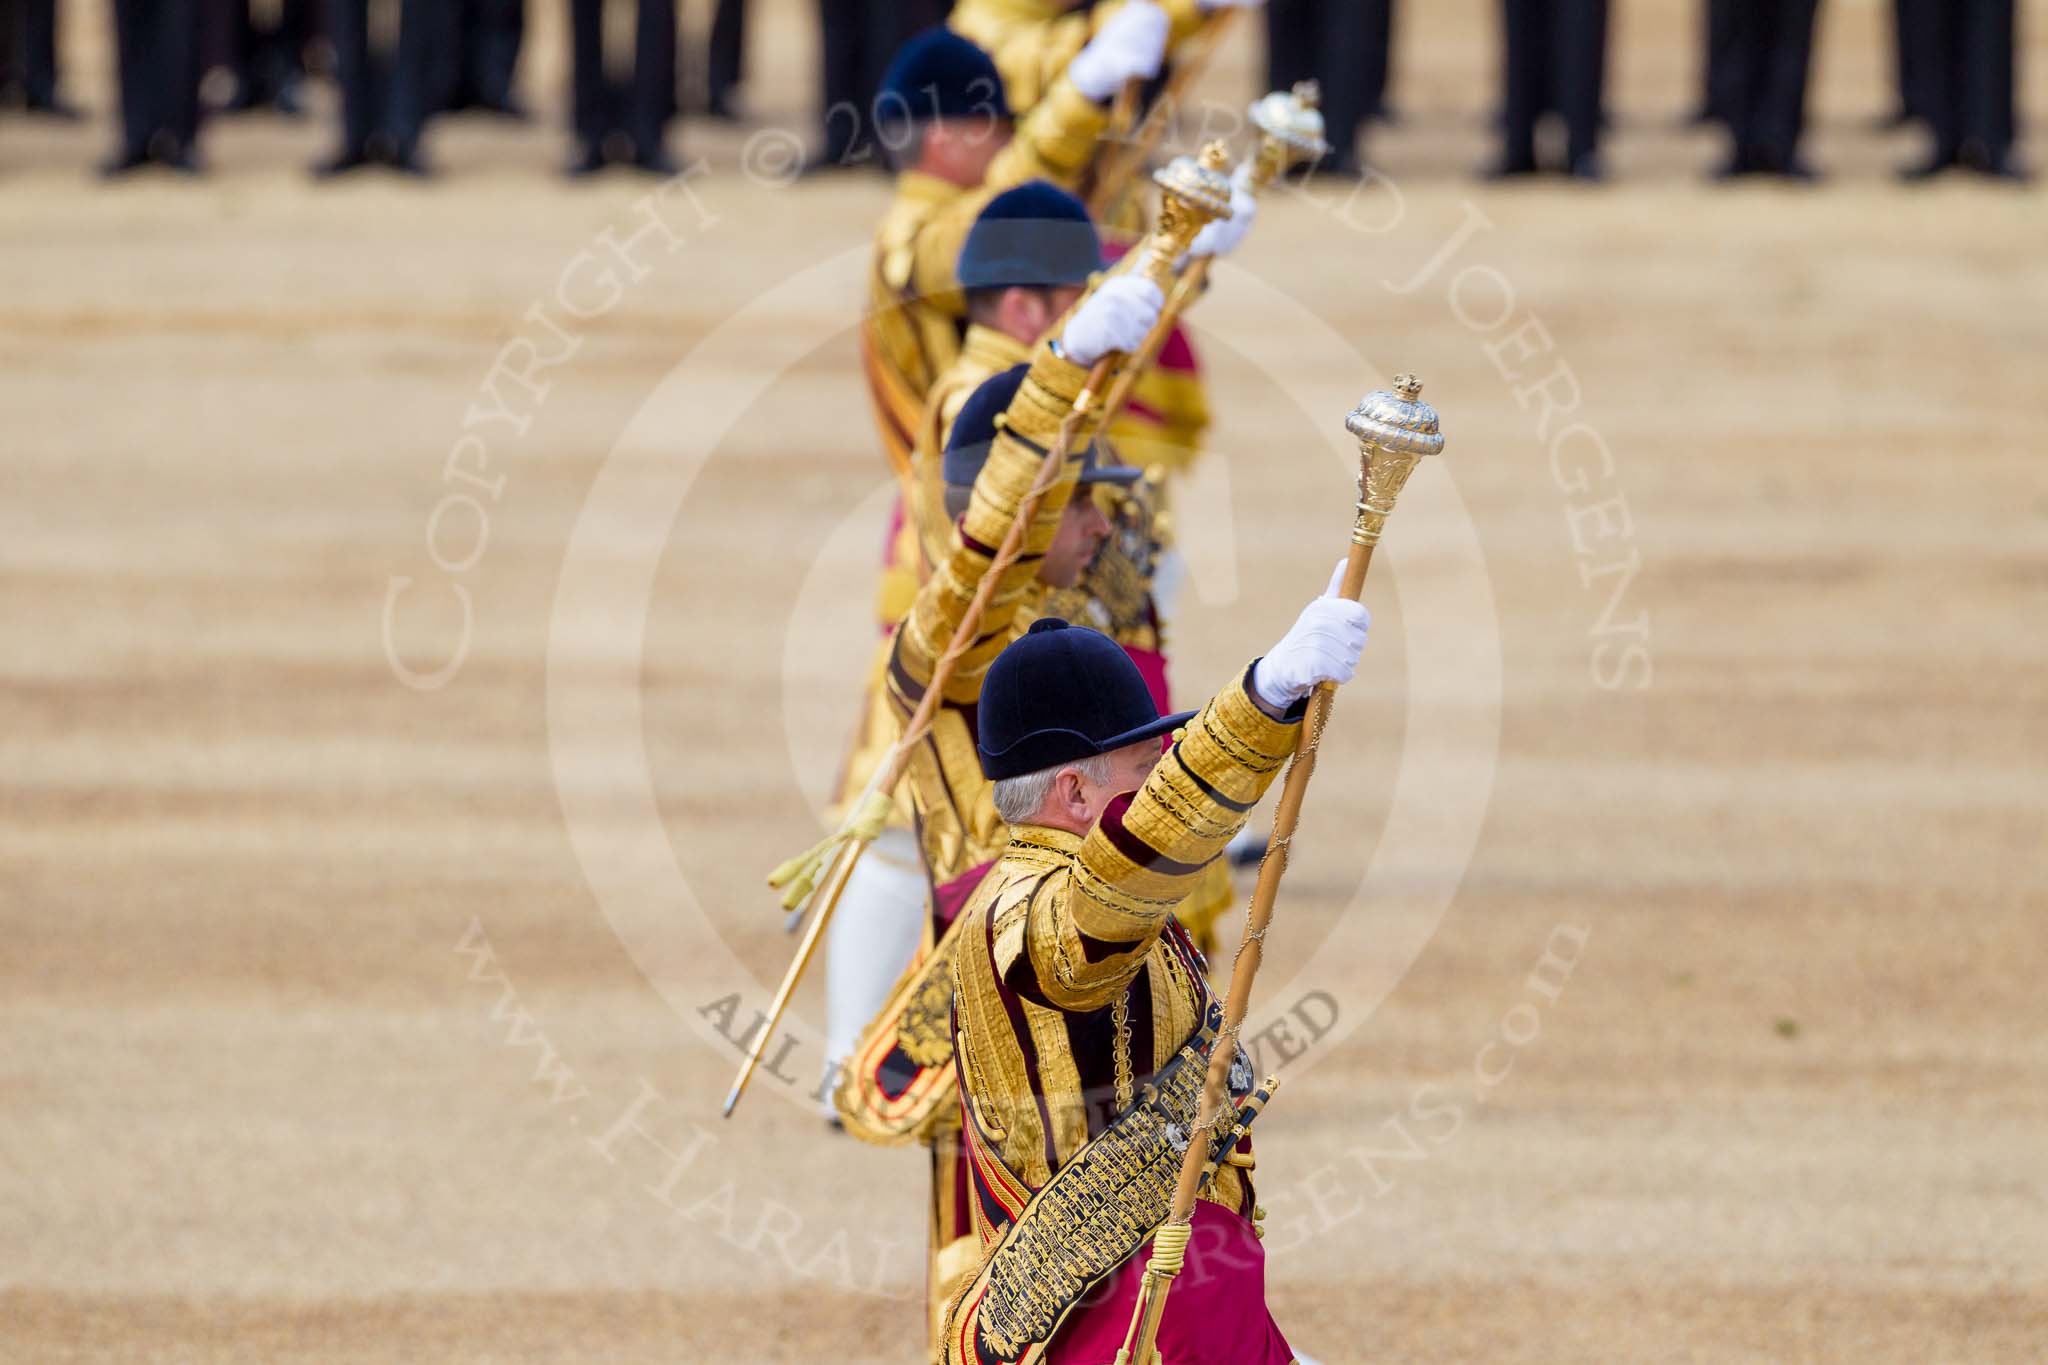 The Colonel's Review 2015.
Horse Guards Parade, Westminster,
London,

United Kingdom,
on 06 June 2015 at 11:08, image #248